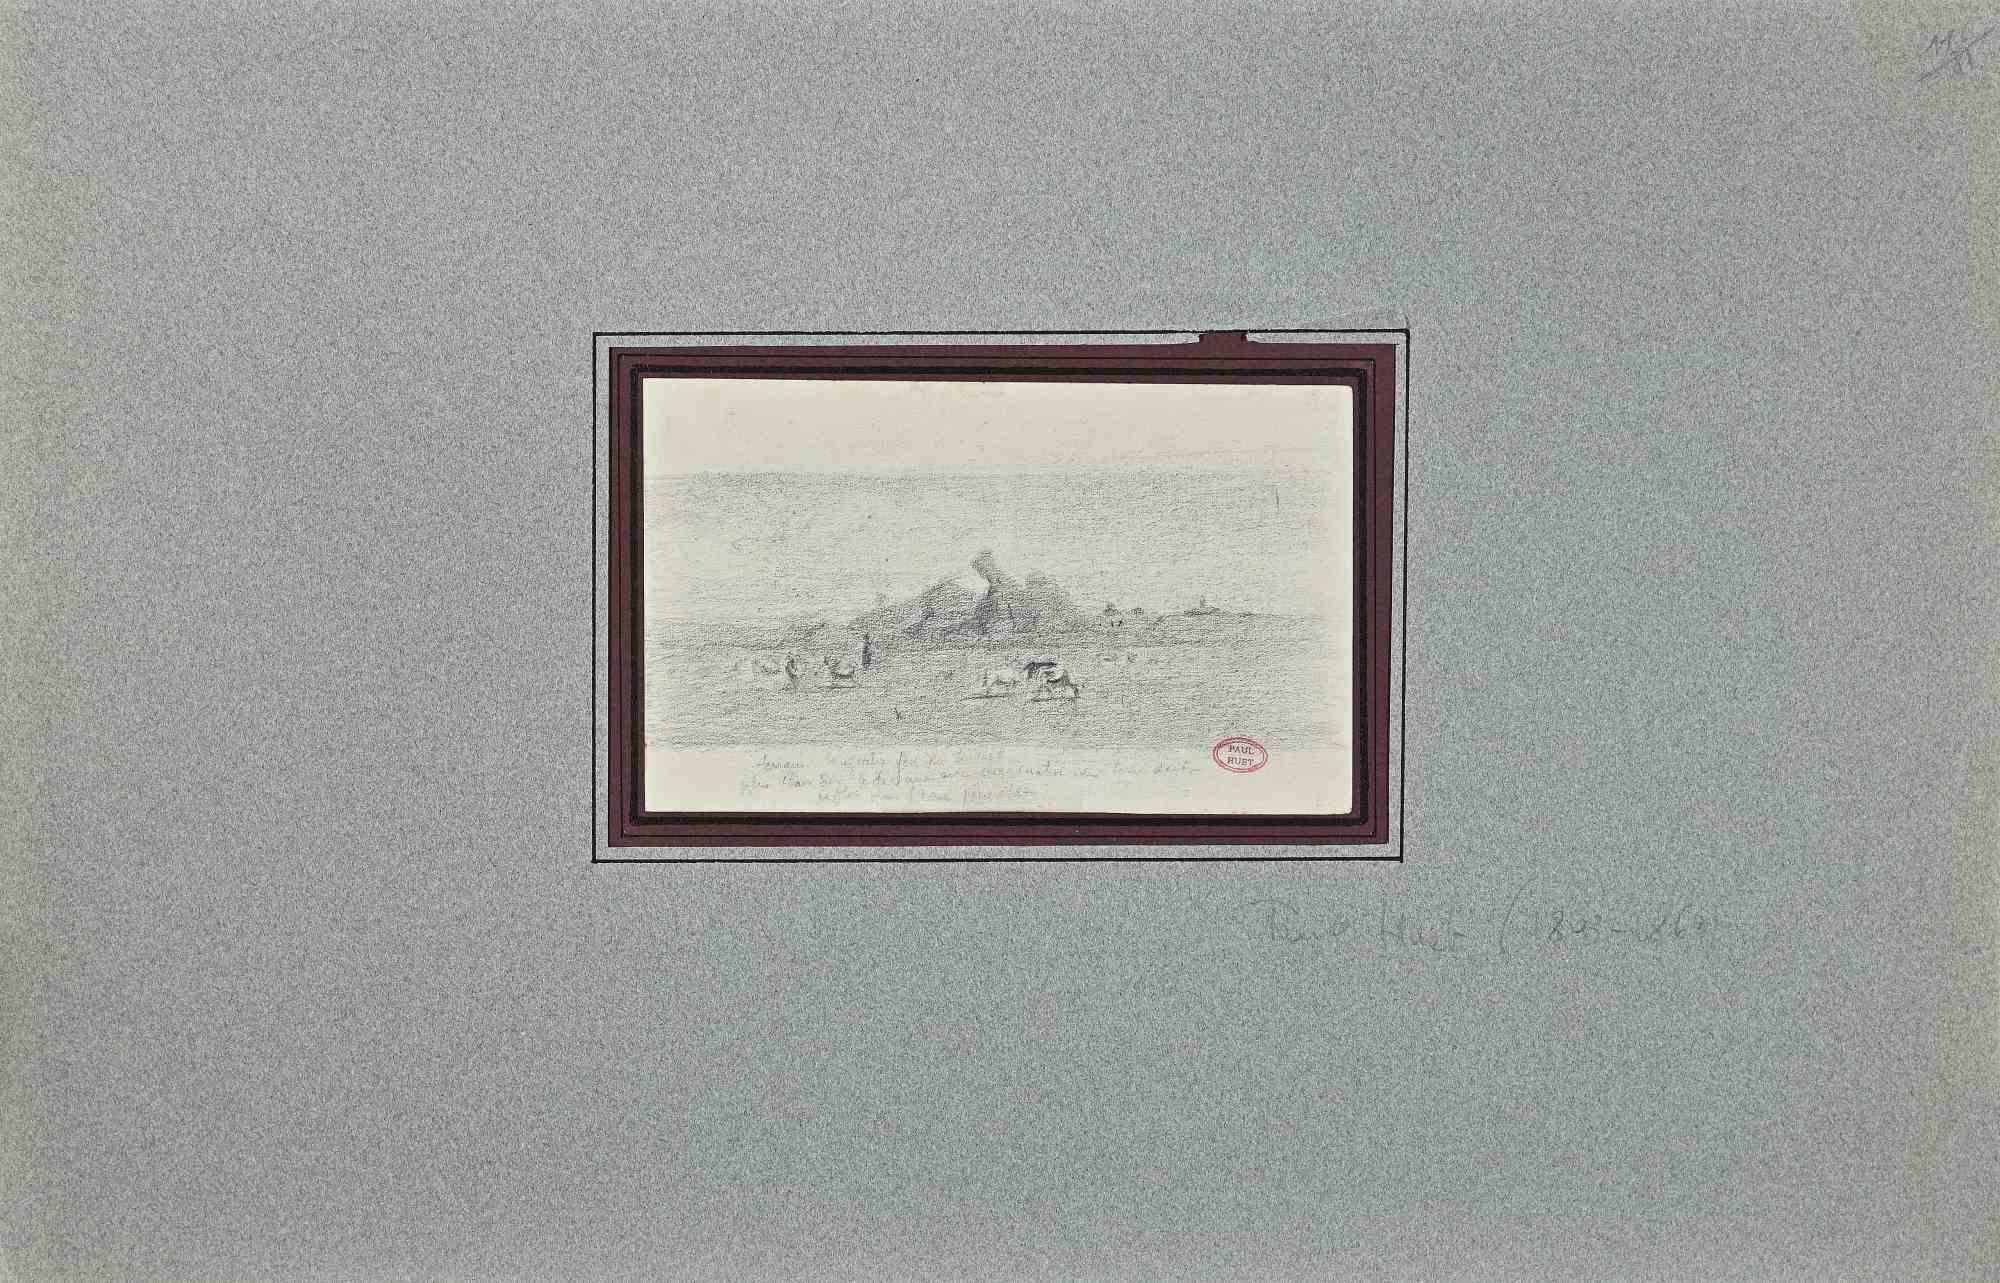 Landscape is a Pencil Drawing realized by Paul Huet.

Good condition included a grey cardboard passpartout (32.5x50 cm).

Stamp signed on the lower right corner.

Paul Huet (3 October 1803 – 8 January 1869) was a French painter and printmaker born